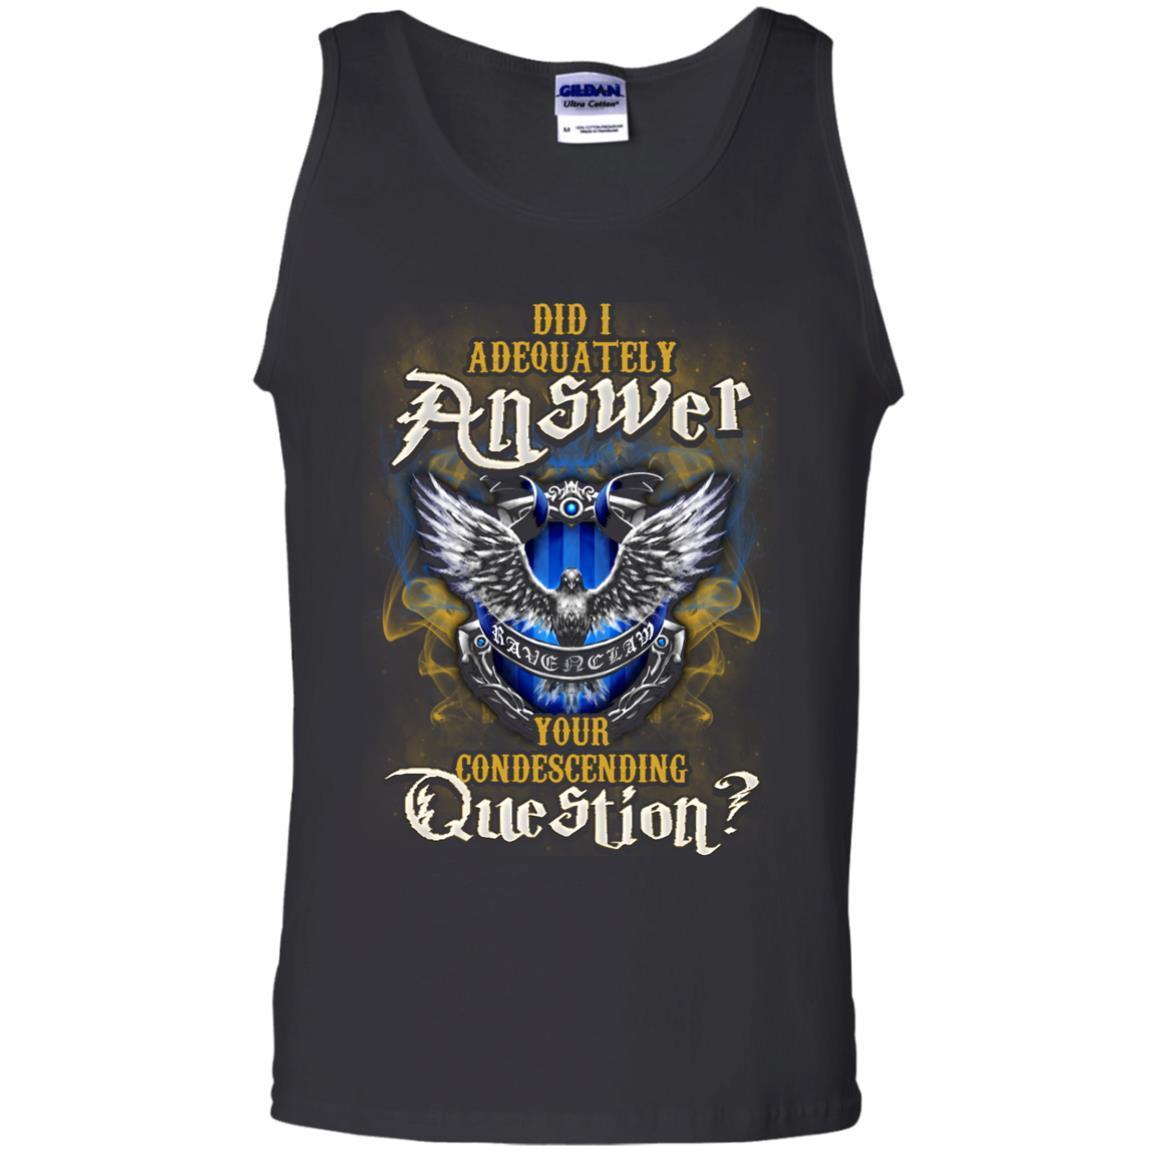 Did I Adequately Answer Your Condescending Question Ravenclaw House Harry Potter Fan Shirt Black S 